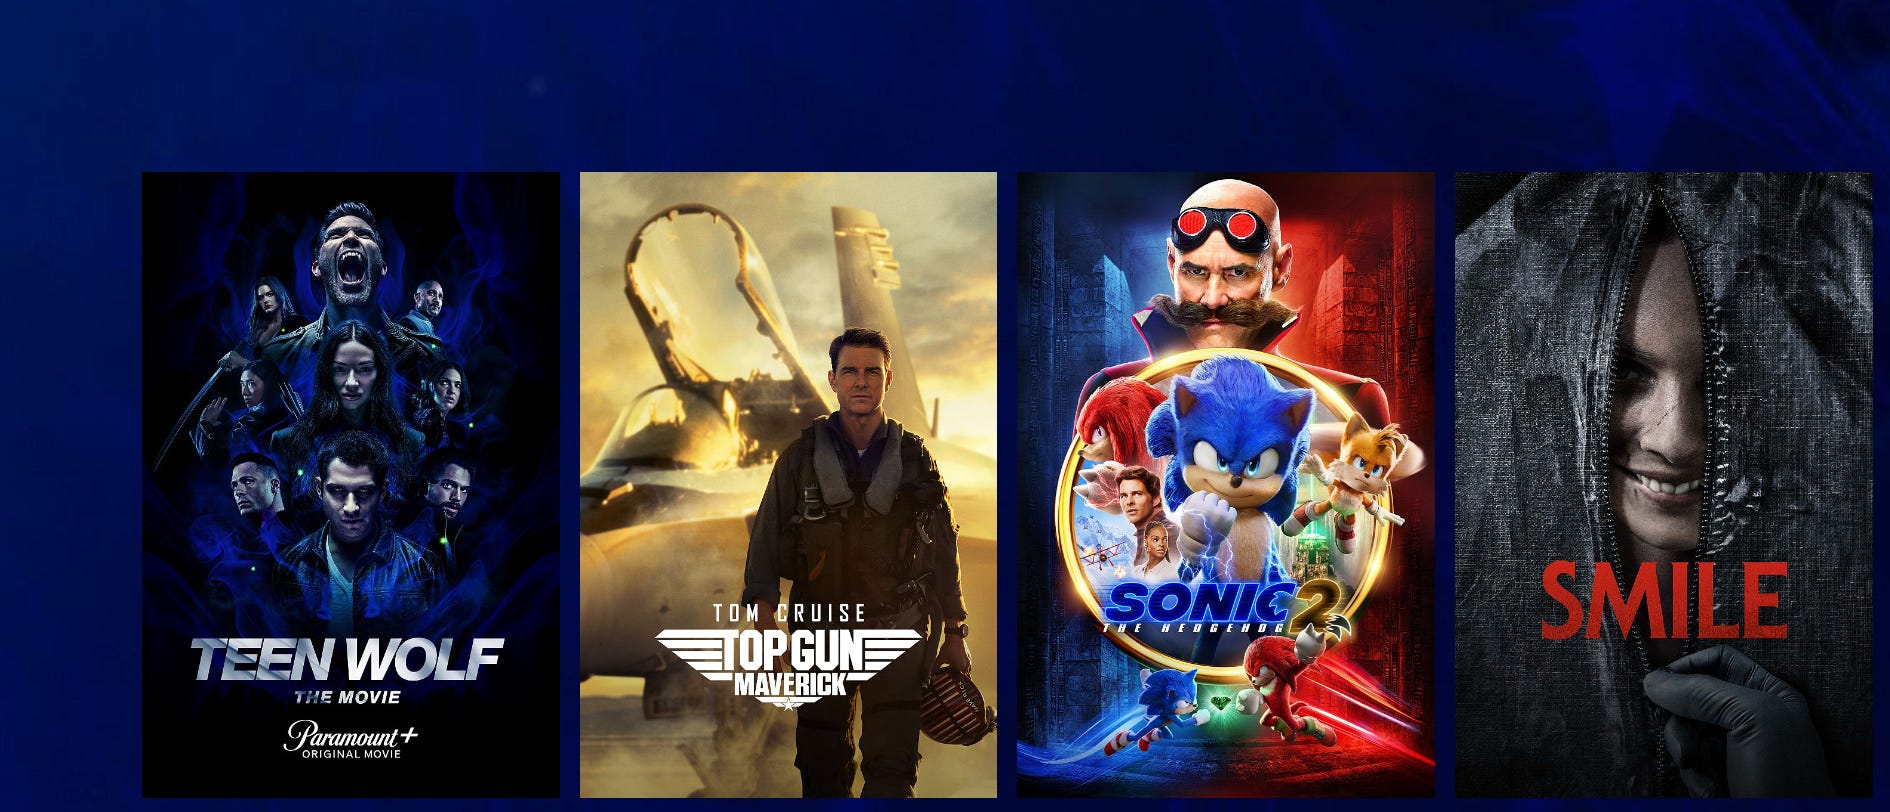 Watch Most Popular Movies on Paramount+ - Try for Free